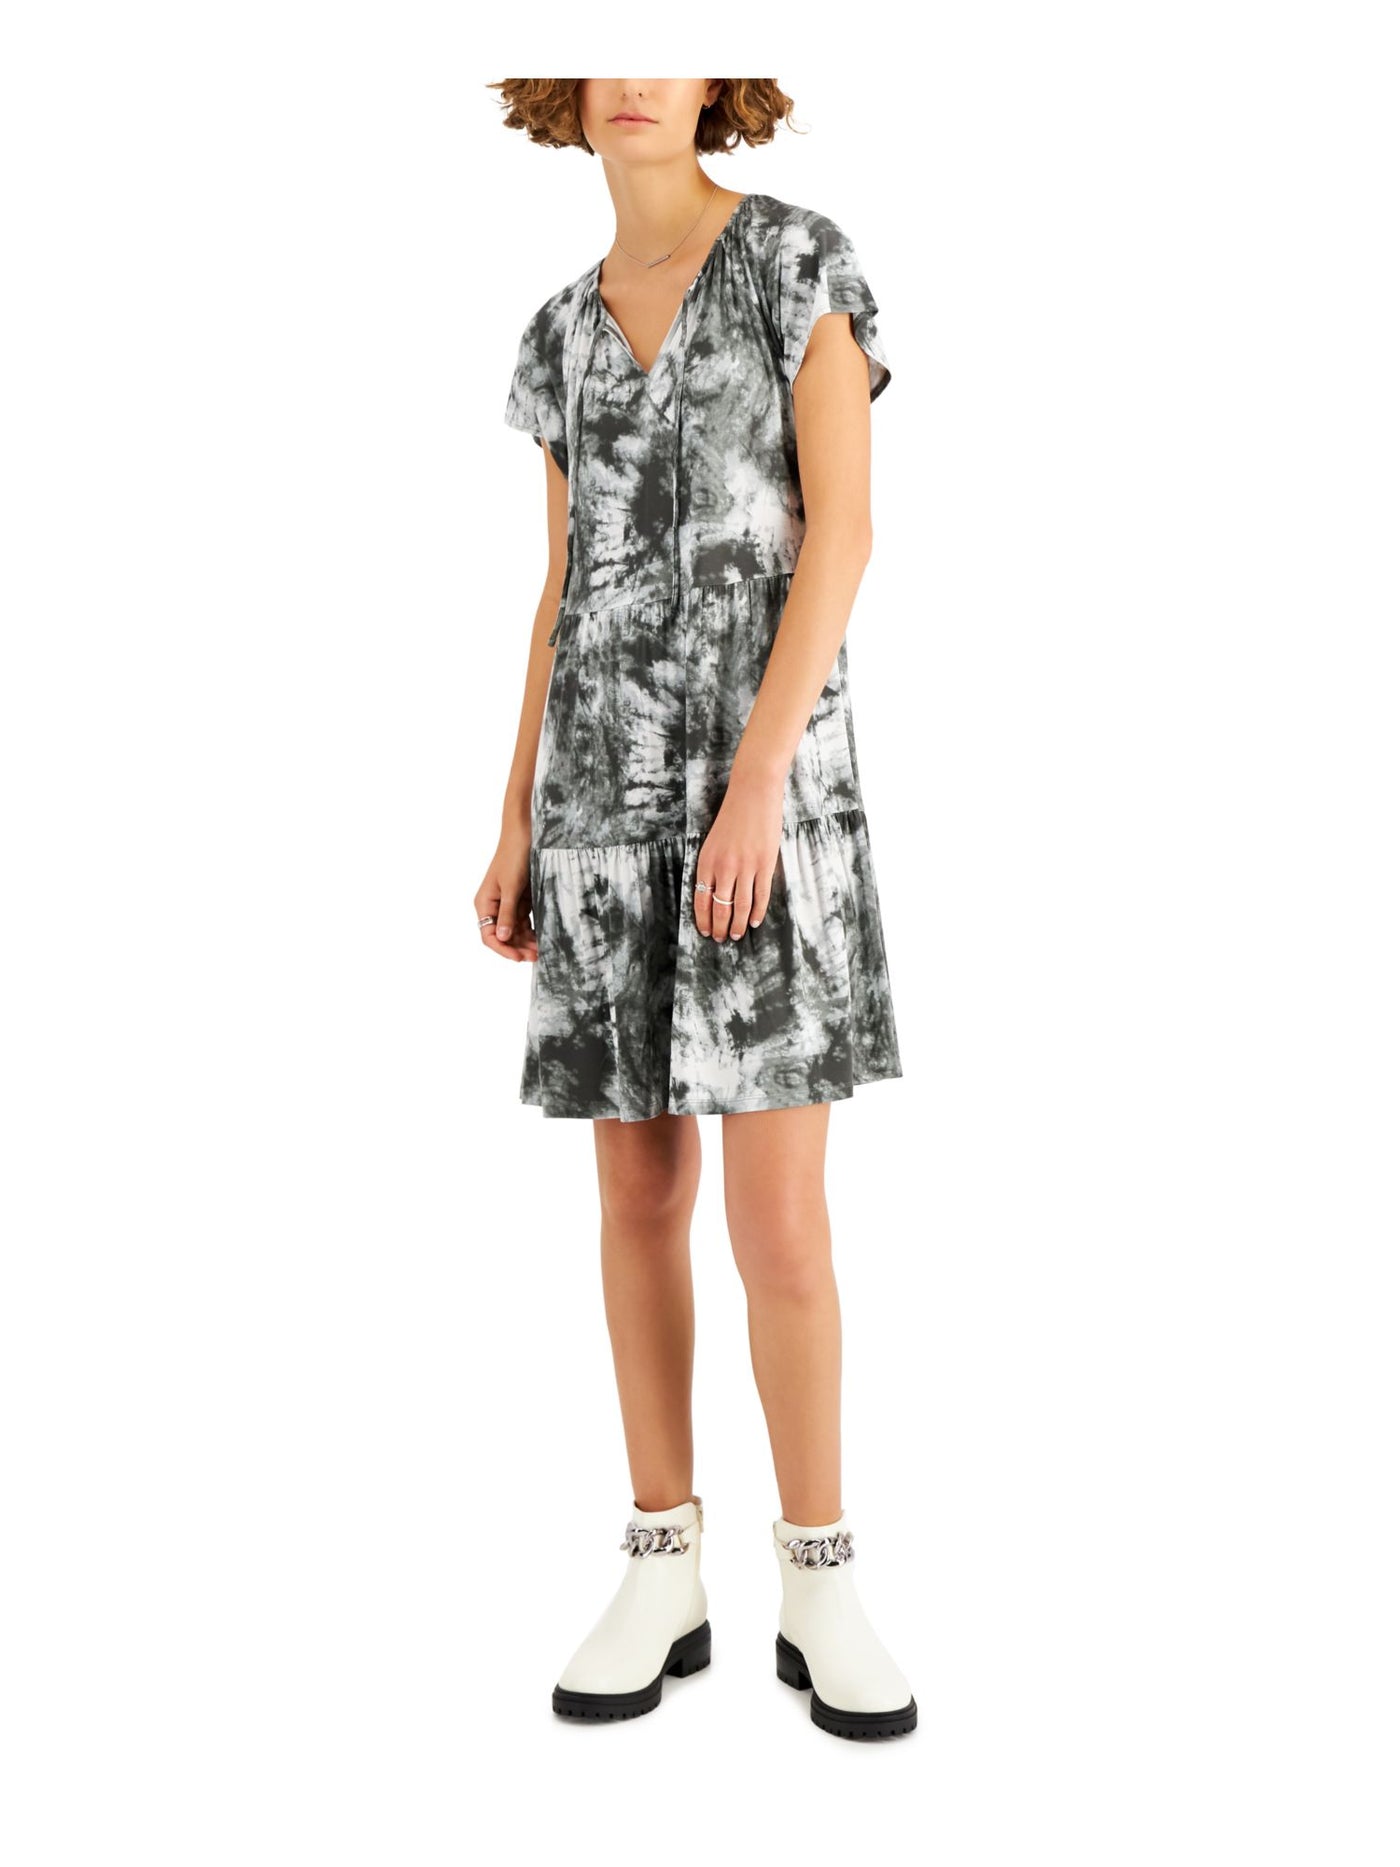 STYLE & COMPANY Womens Gray Stretch Ruffled Pull-on Style Tie Dye Short Sleeve Tie Neck Above The Knee Shift Dress XS